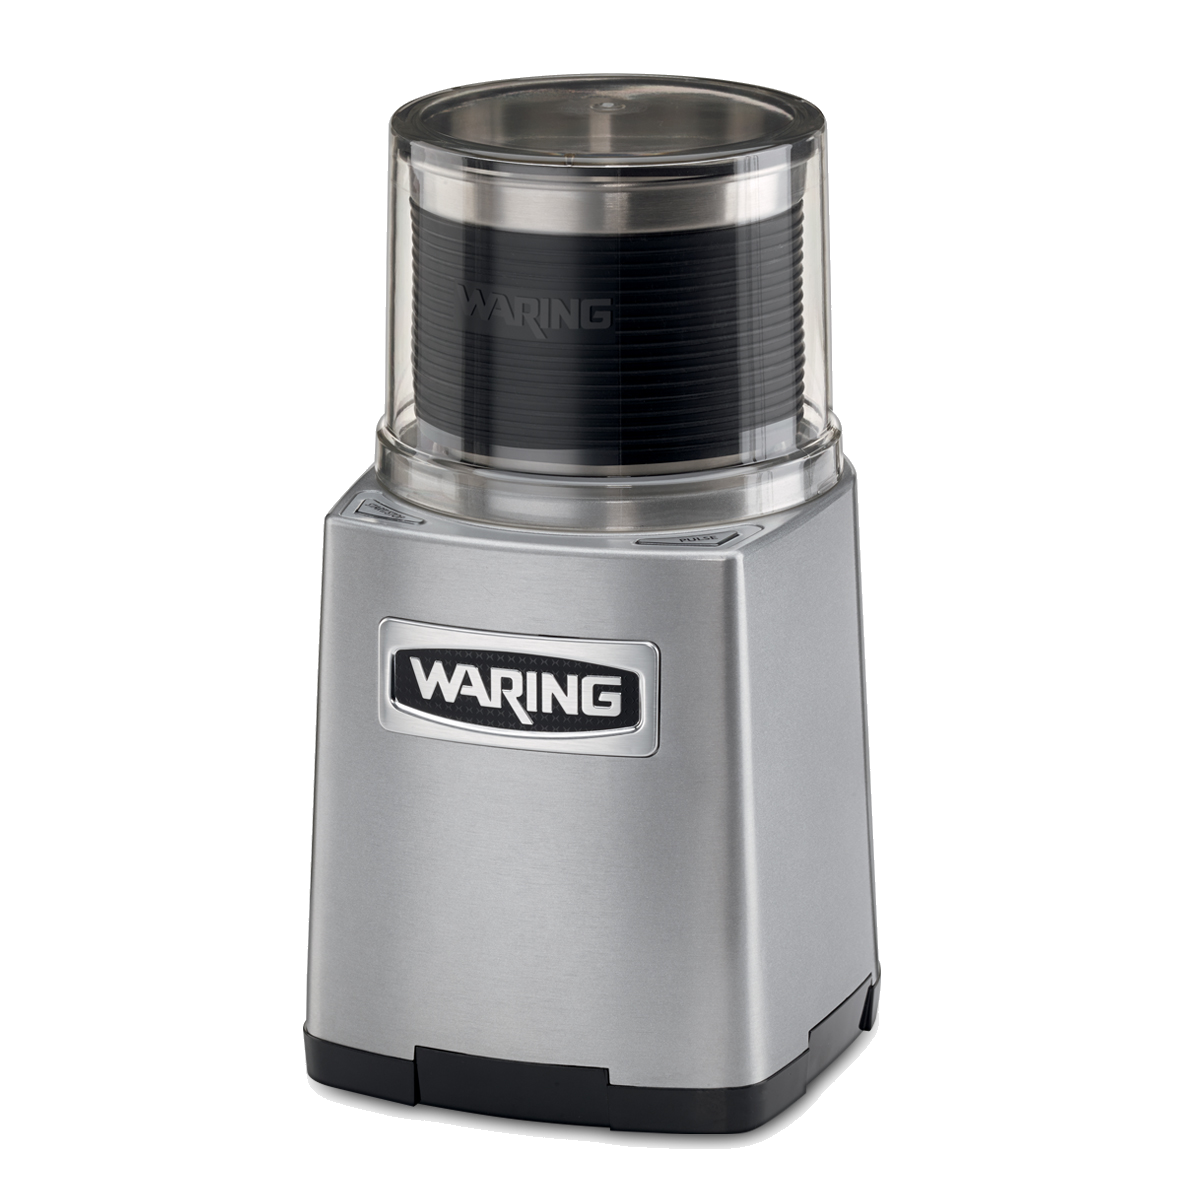 Waring Commercial Kitchen Appliances - Home page